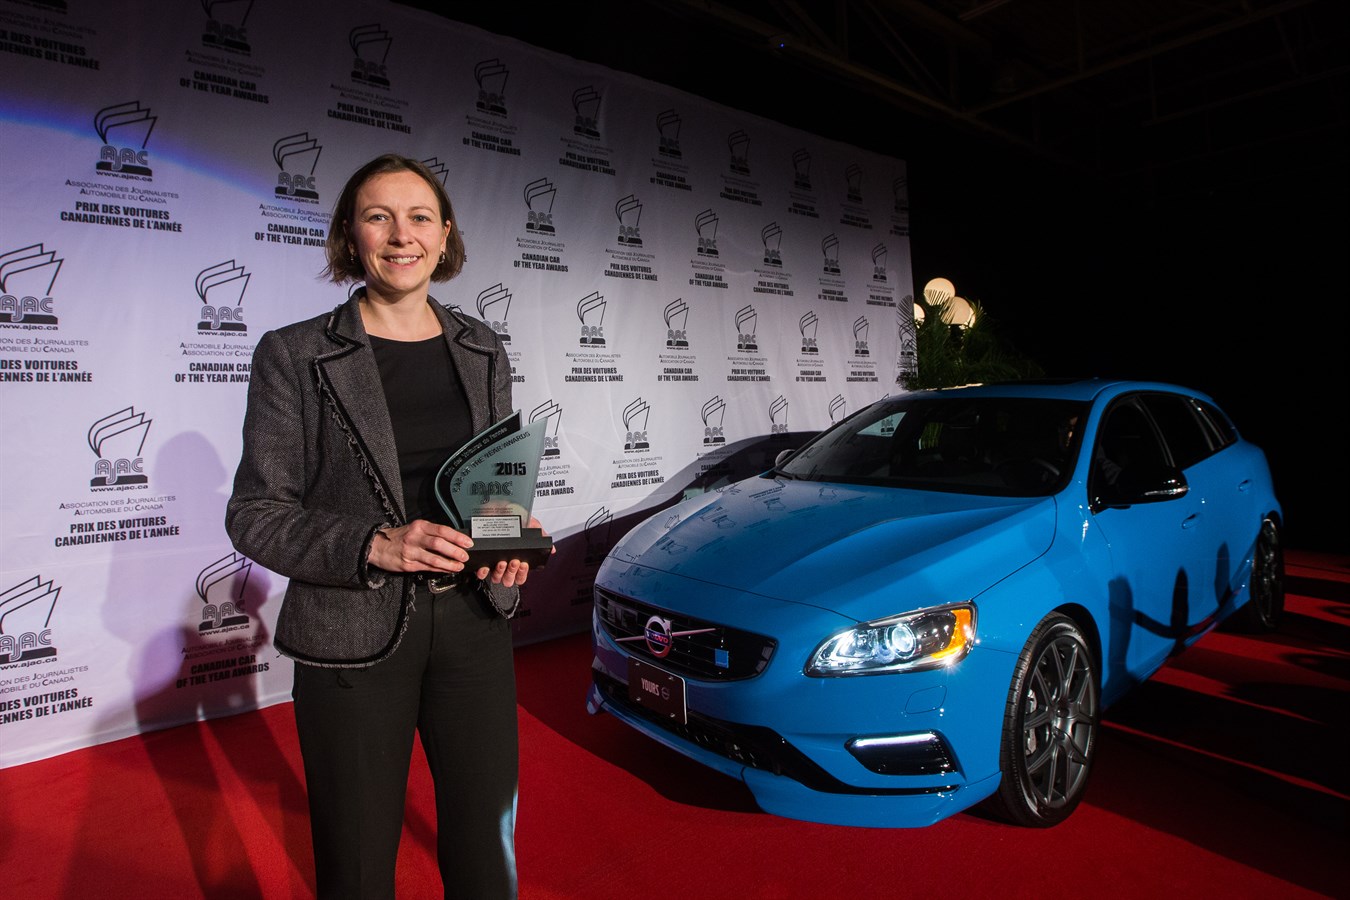 Margareta Mahlstedt accepting the Canadian Car of the Year award for Sports - Performance, over $50k for the 2015 V60 Polestar